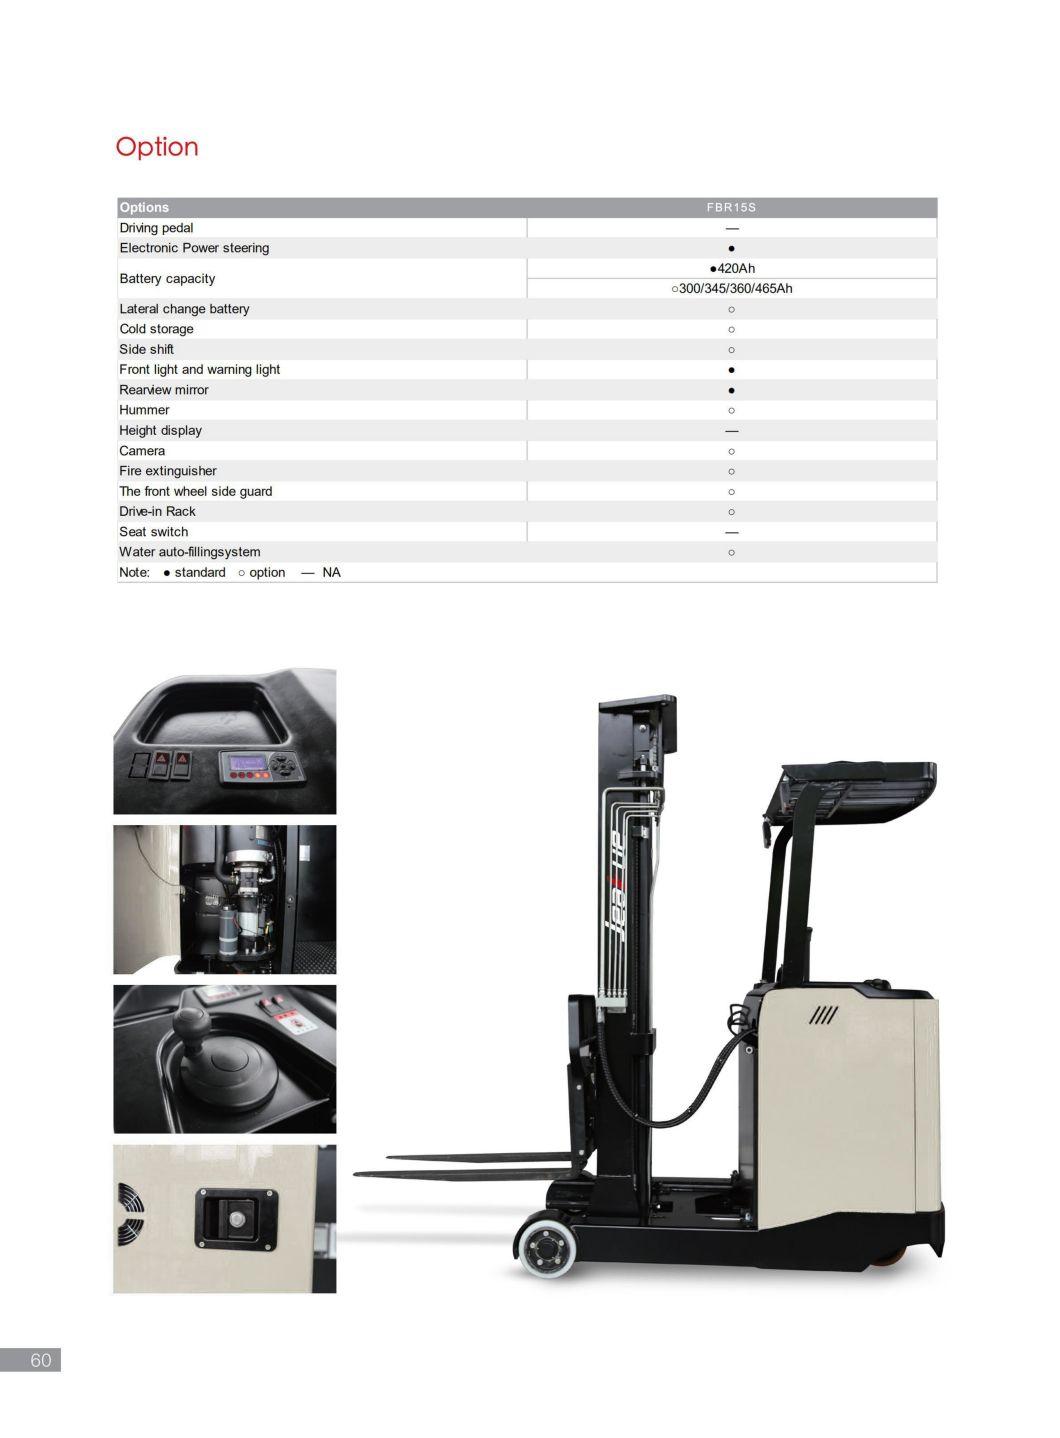 1.5 Ton Hot Sale Electric Reach Truck Forklift